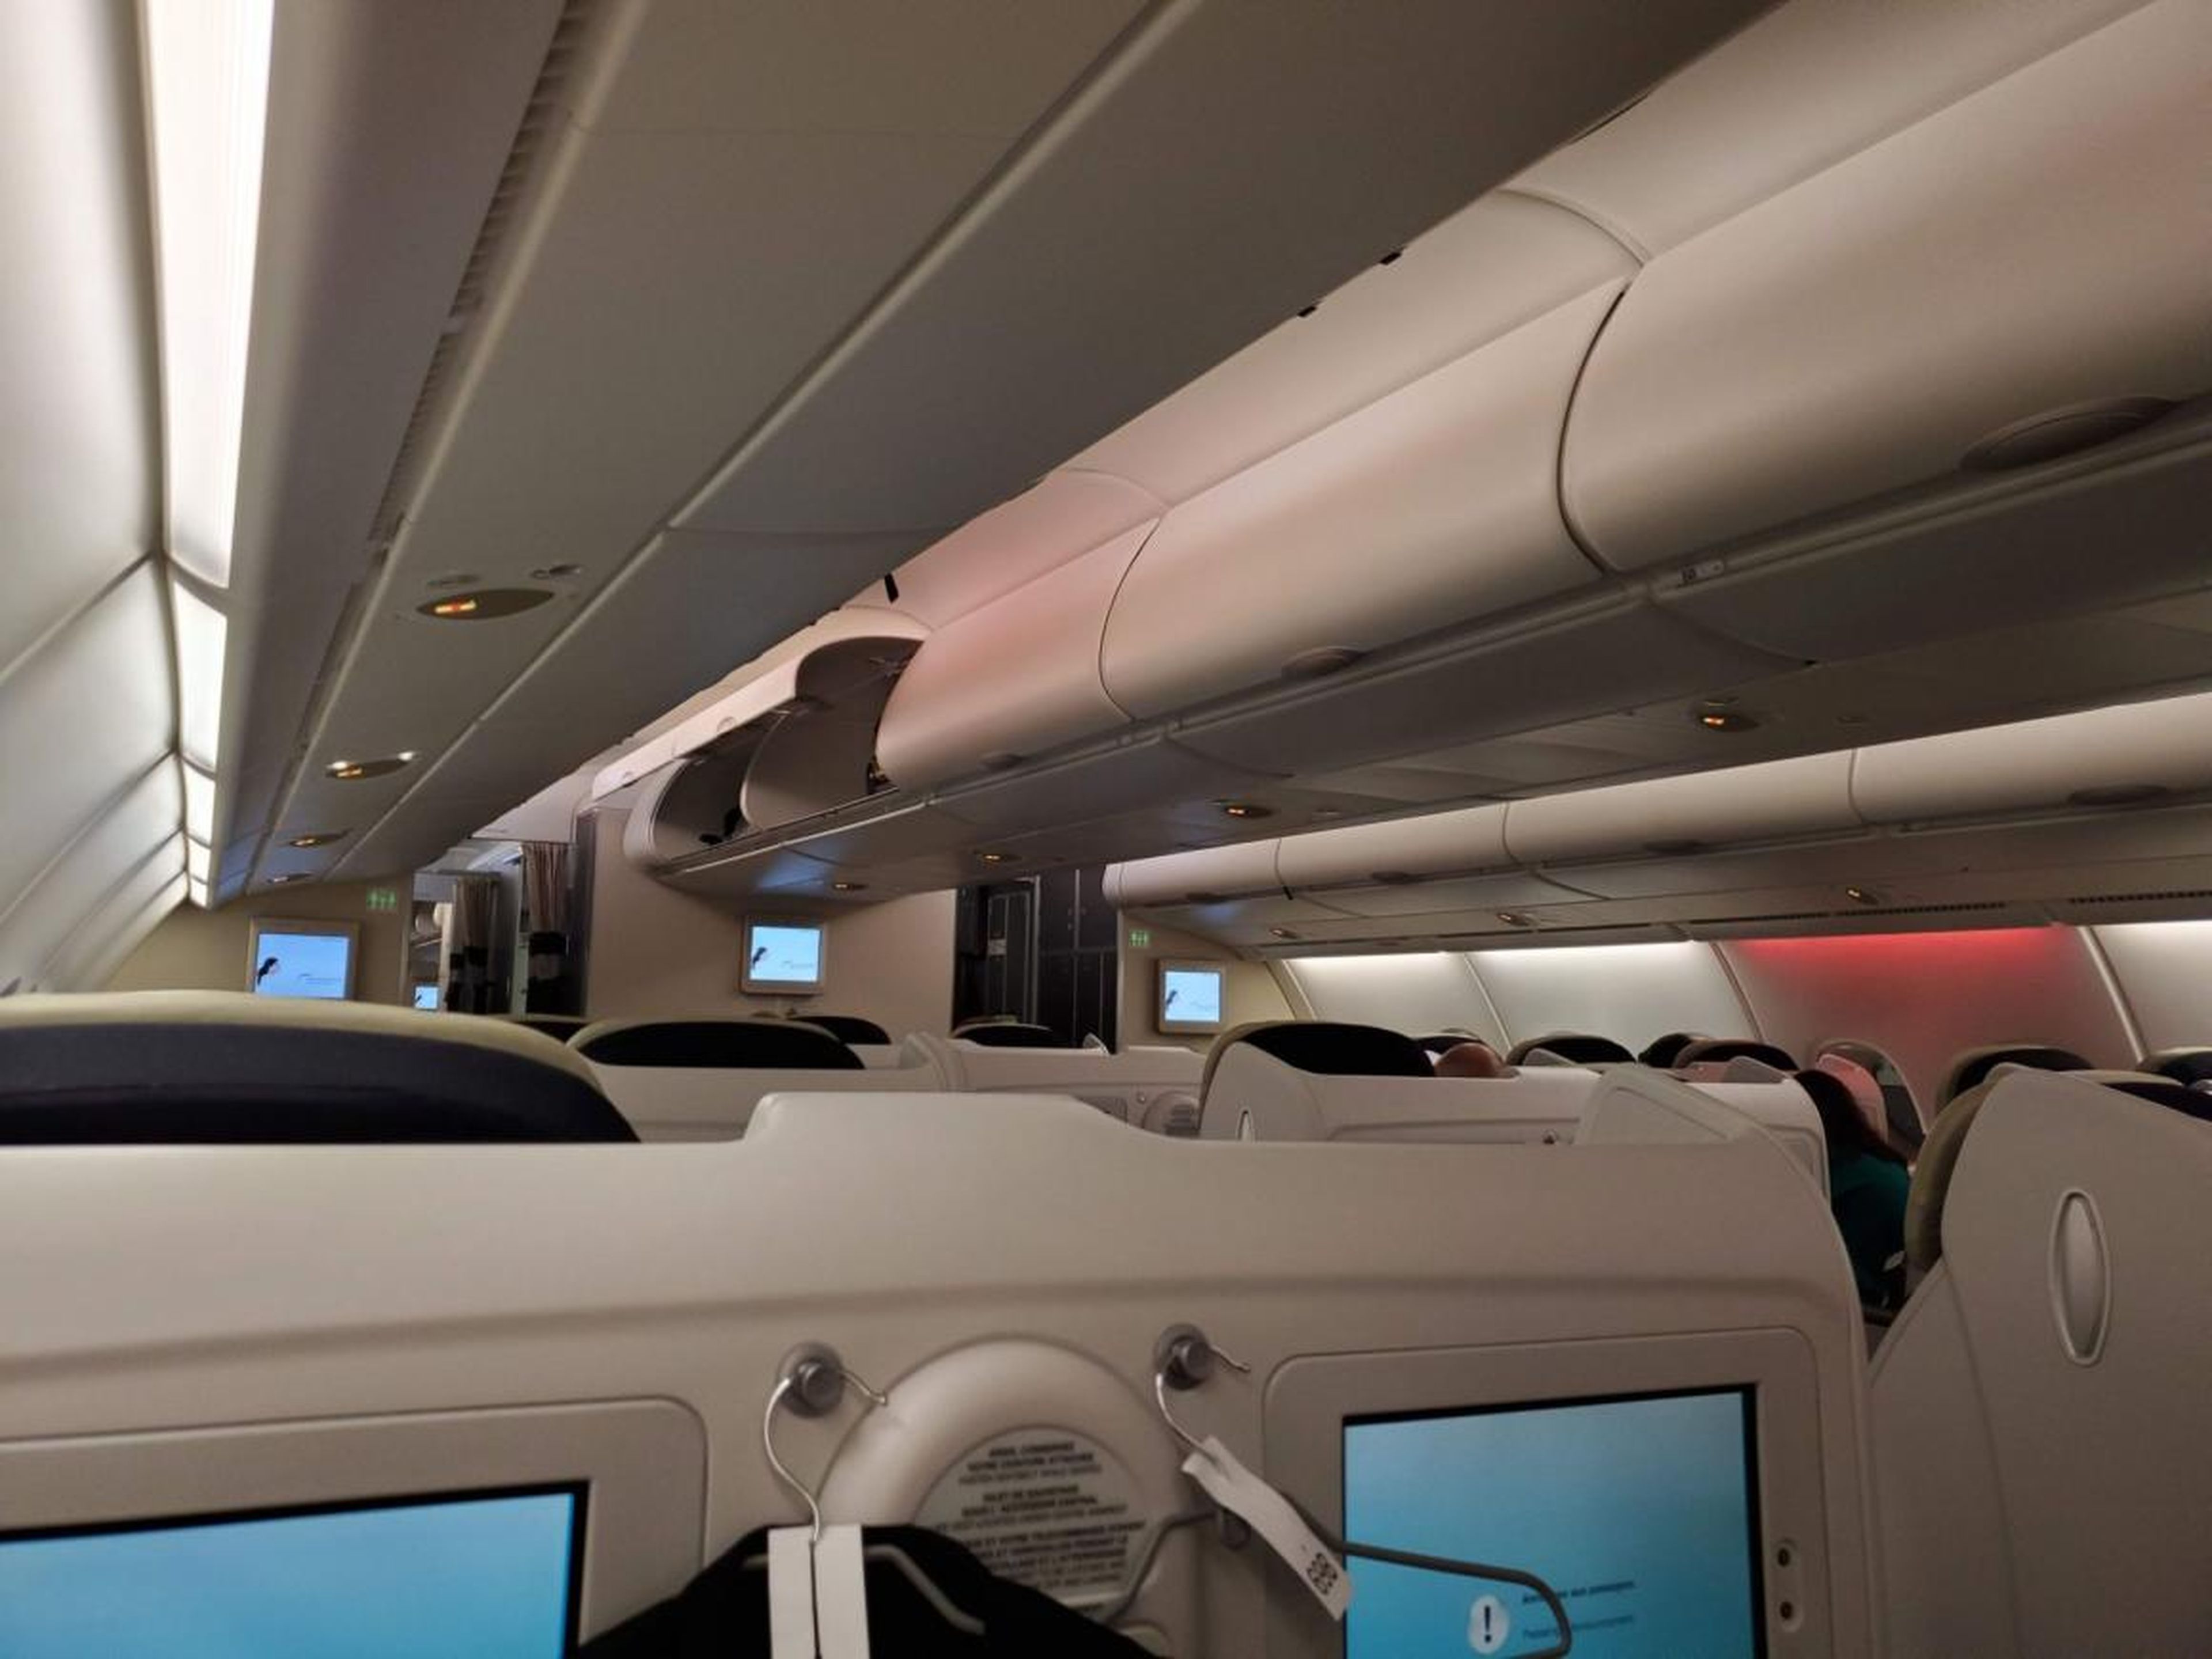 The business-class cabin had six seats per row, in a 2-2-2 configuration, so everyone had ample space. I would suggest choosing one of the two window bays if you're traveling with someone, and choosing the middle bay if you're